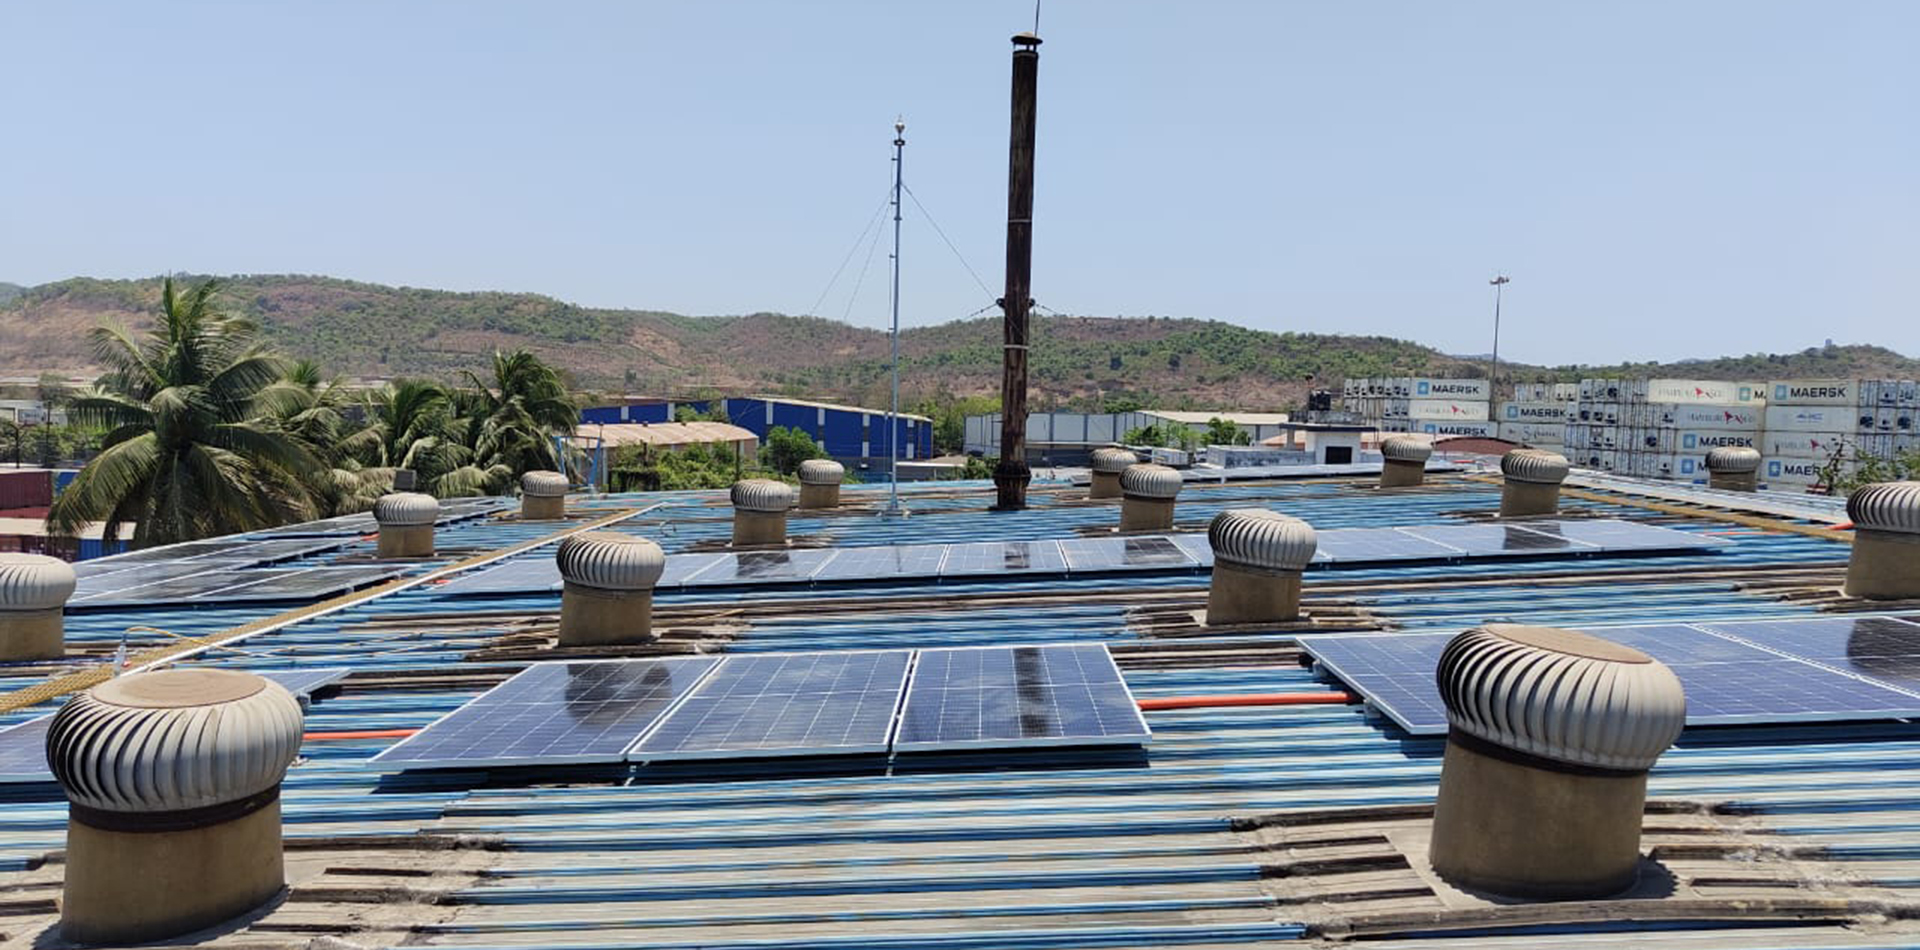 New solar energy installation at the SPS Mumbai depot of Stolt Tank Containers